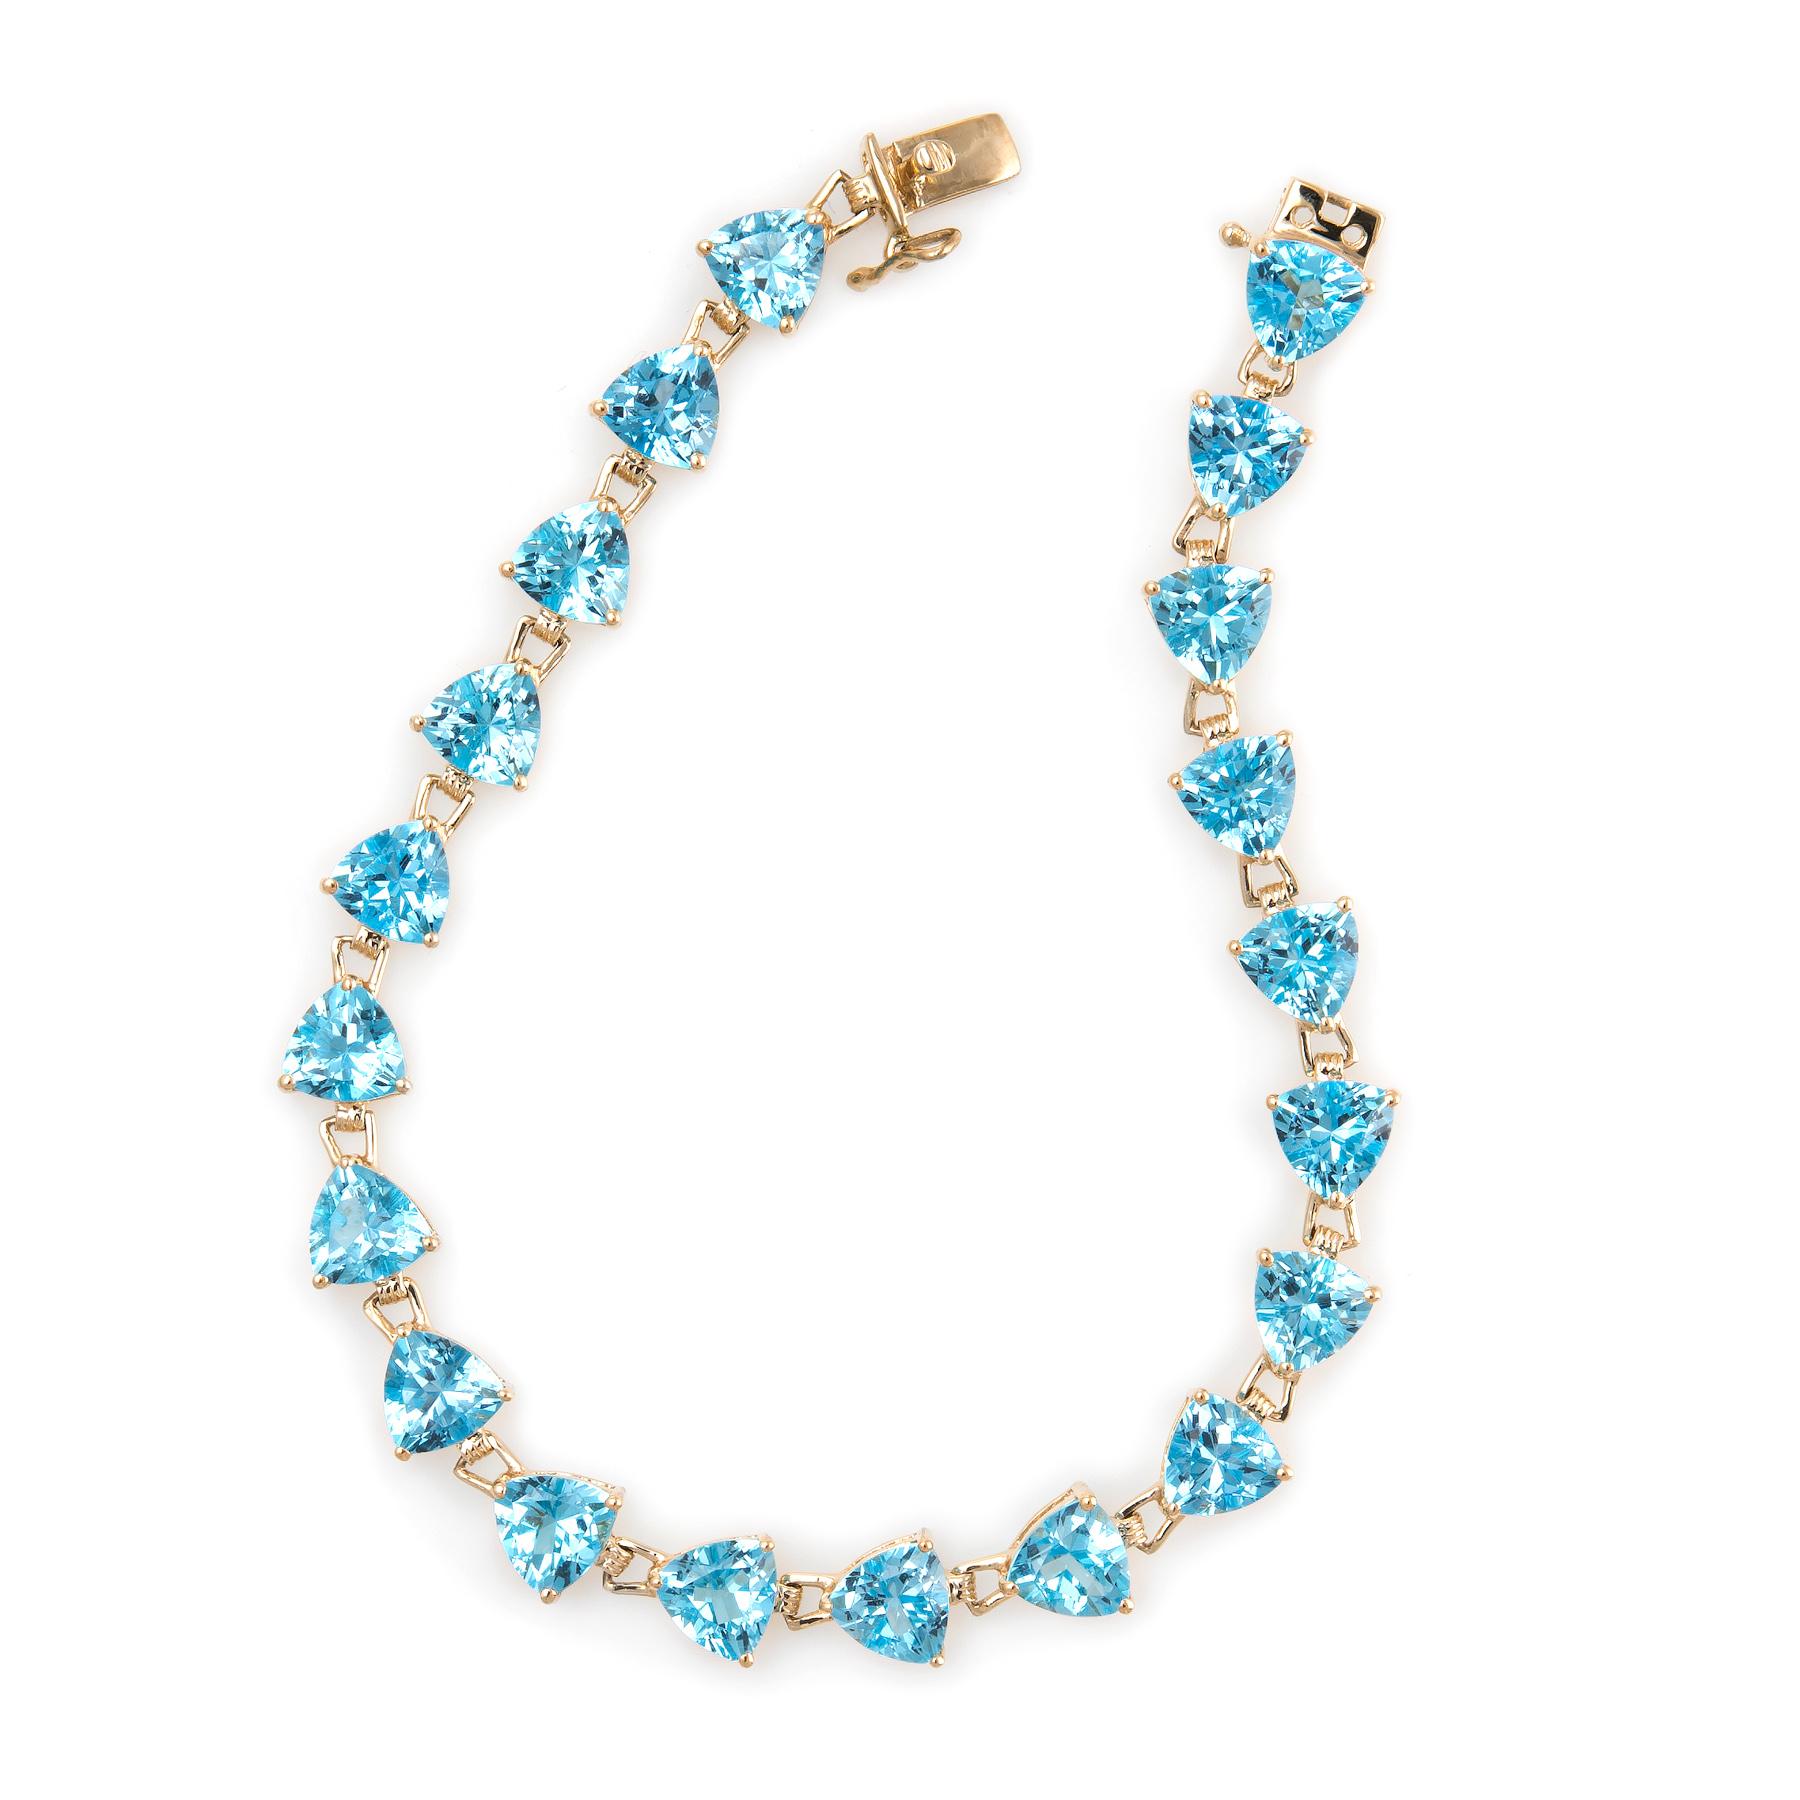 Stylish and finely detailed estate blue topaz bracelet, crafted in 14 karat yellow gold. 

20 trillion cut blue topaz measure 6mm (each) and total an estimated 16 carats. The blue topaz is in excellent condition and free of cracks or chips. 

The